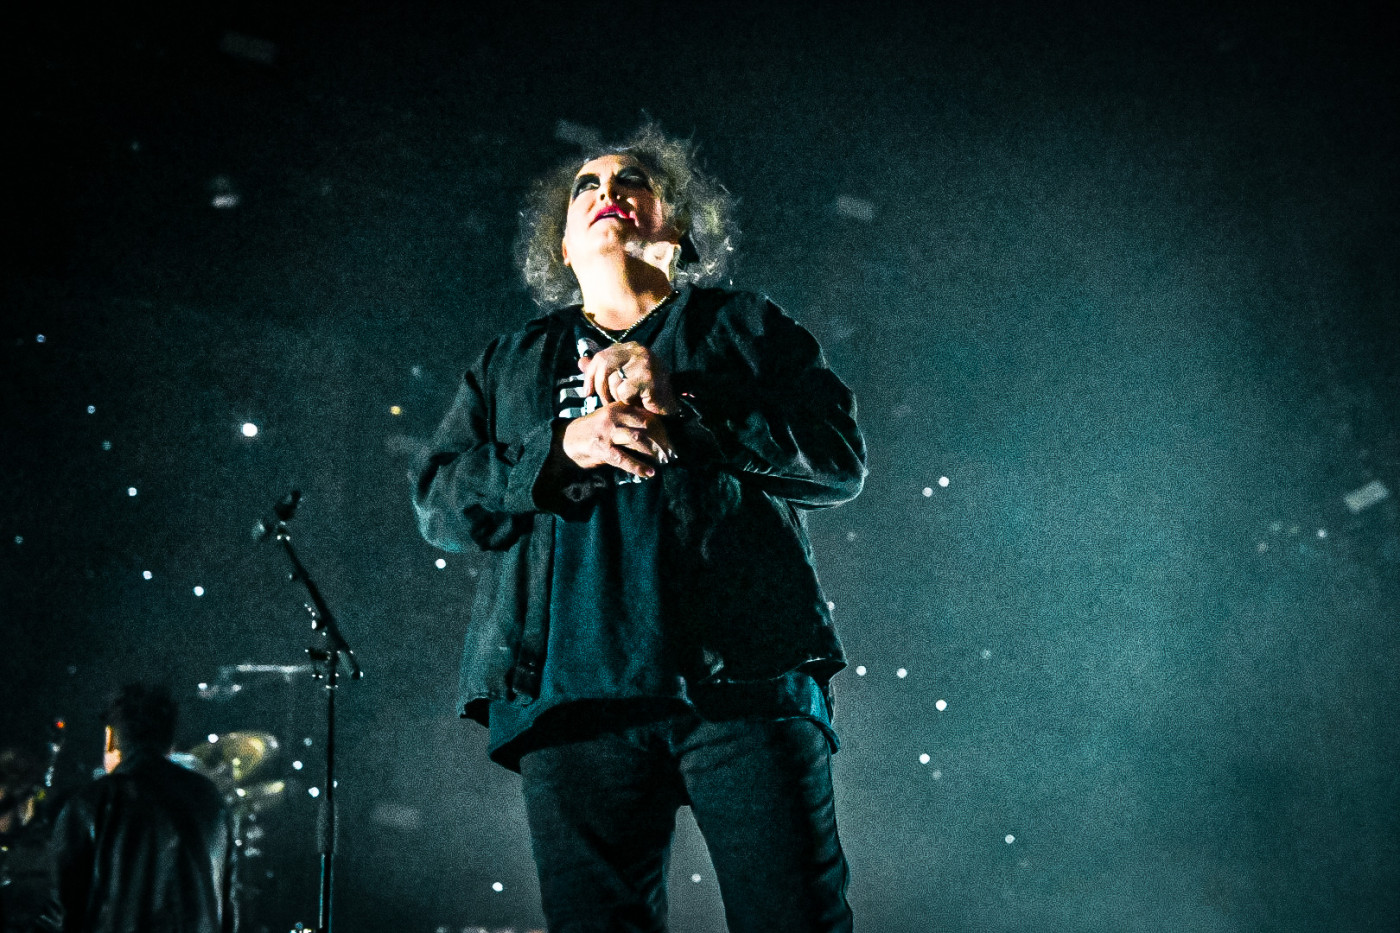 The Cure perform in Glasgow on 4th December 2022. Image: Calum Buchan